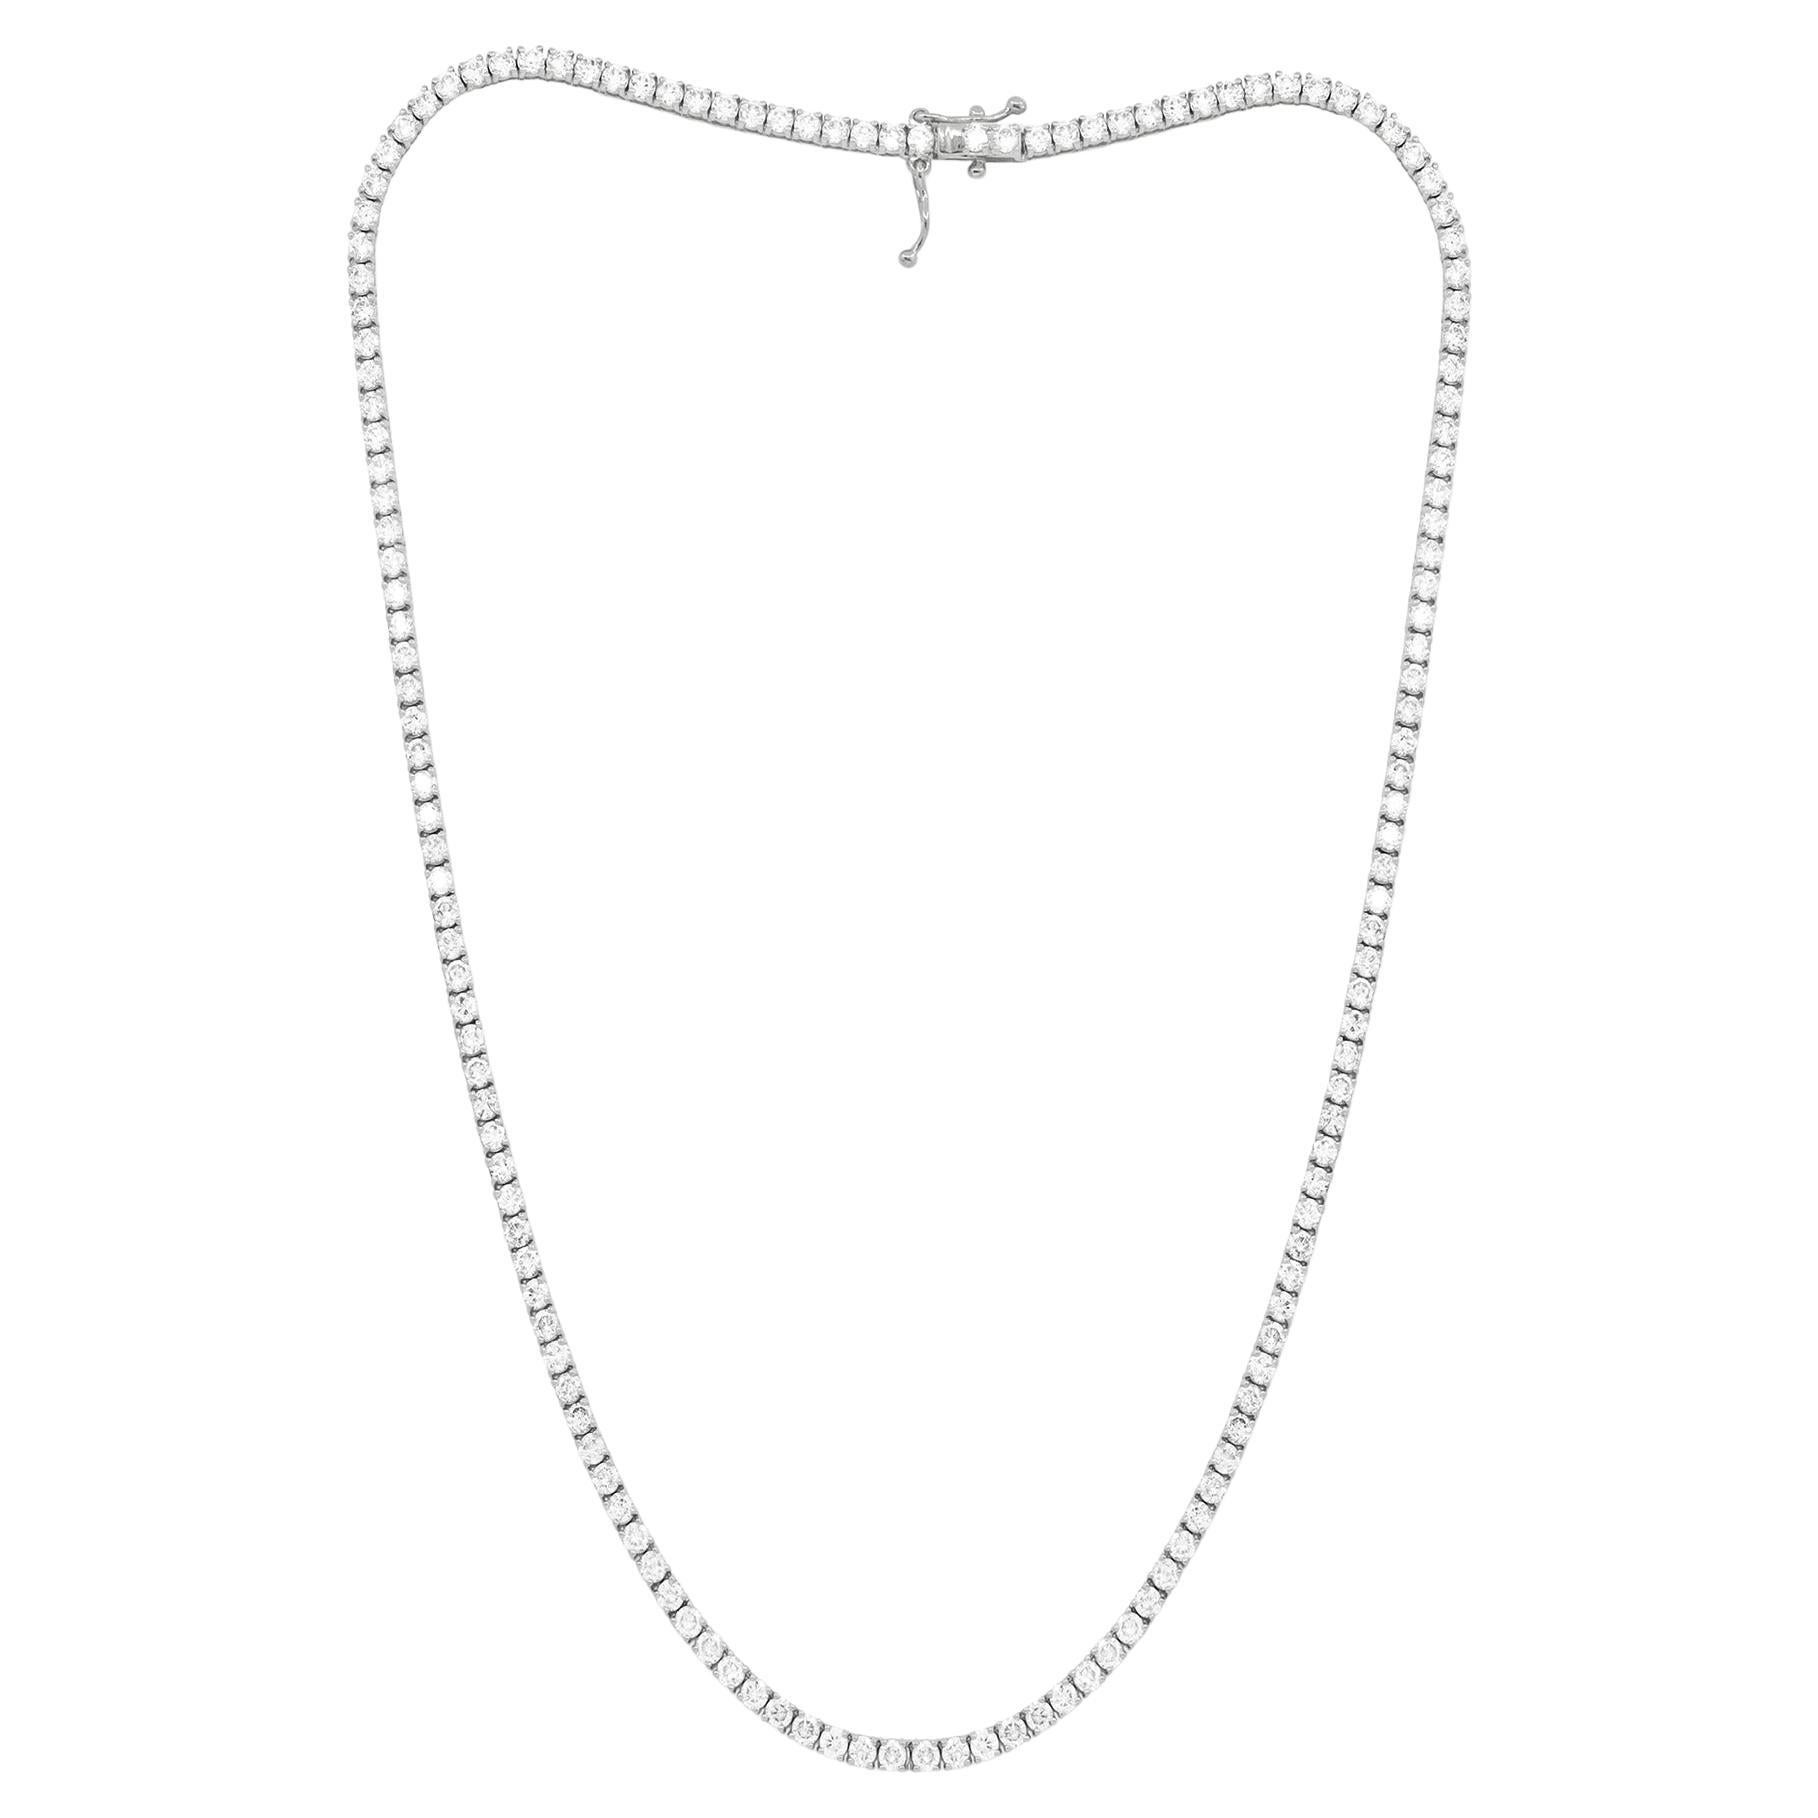 Diana M. 14 kt white gold, 16" 4 prong diamond tennis necklace featuring 8.00 ct For Sale